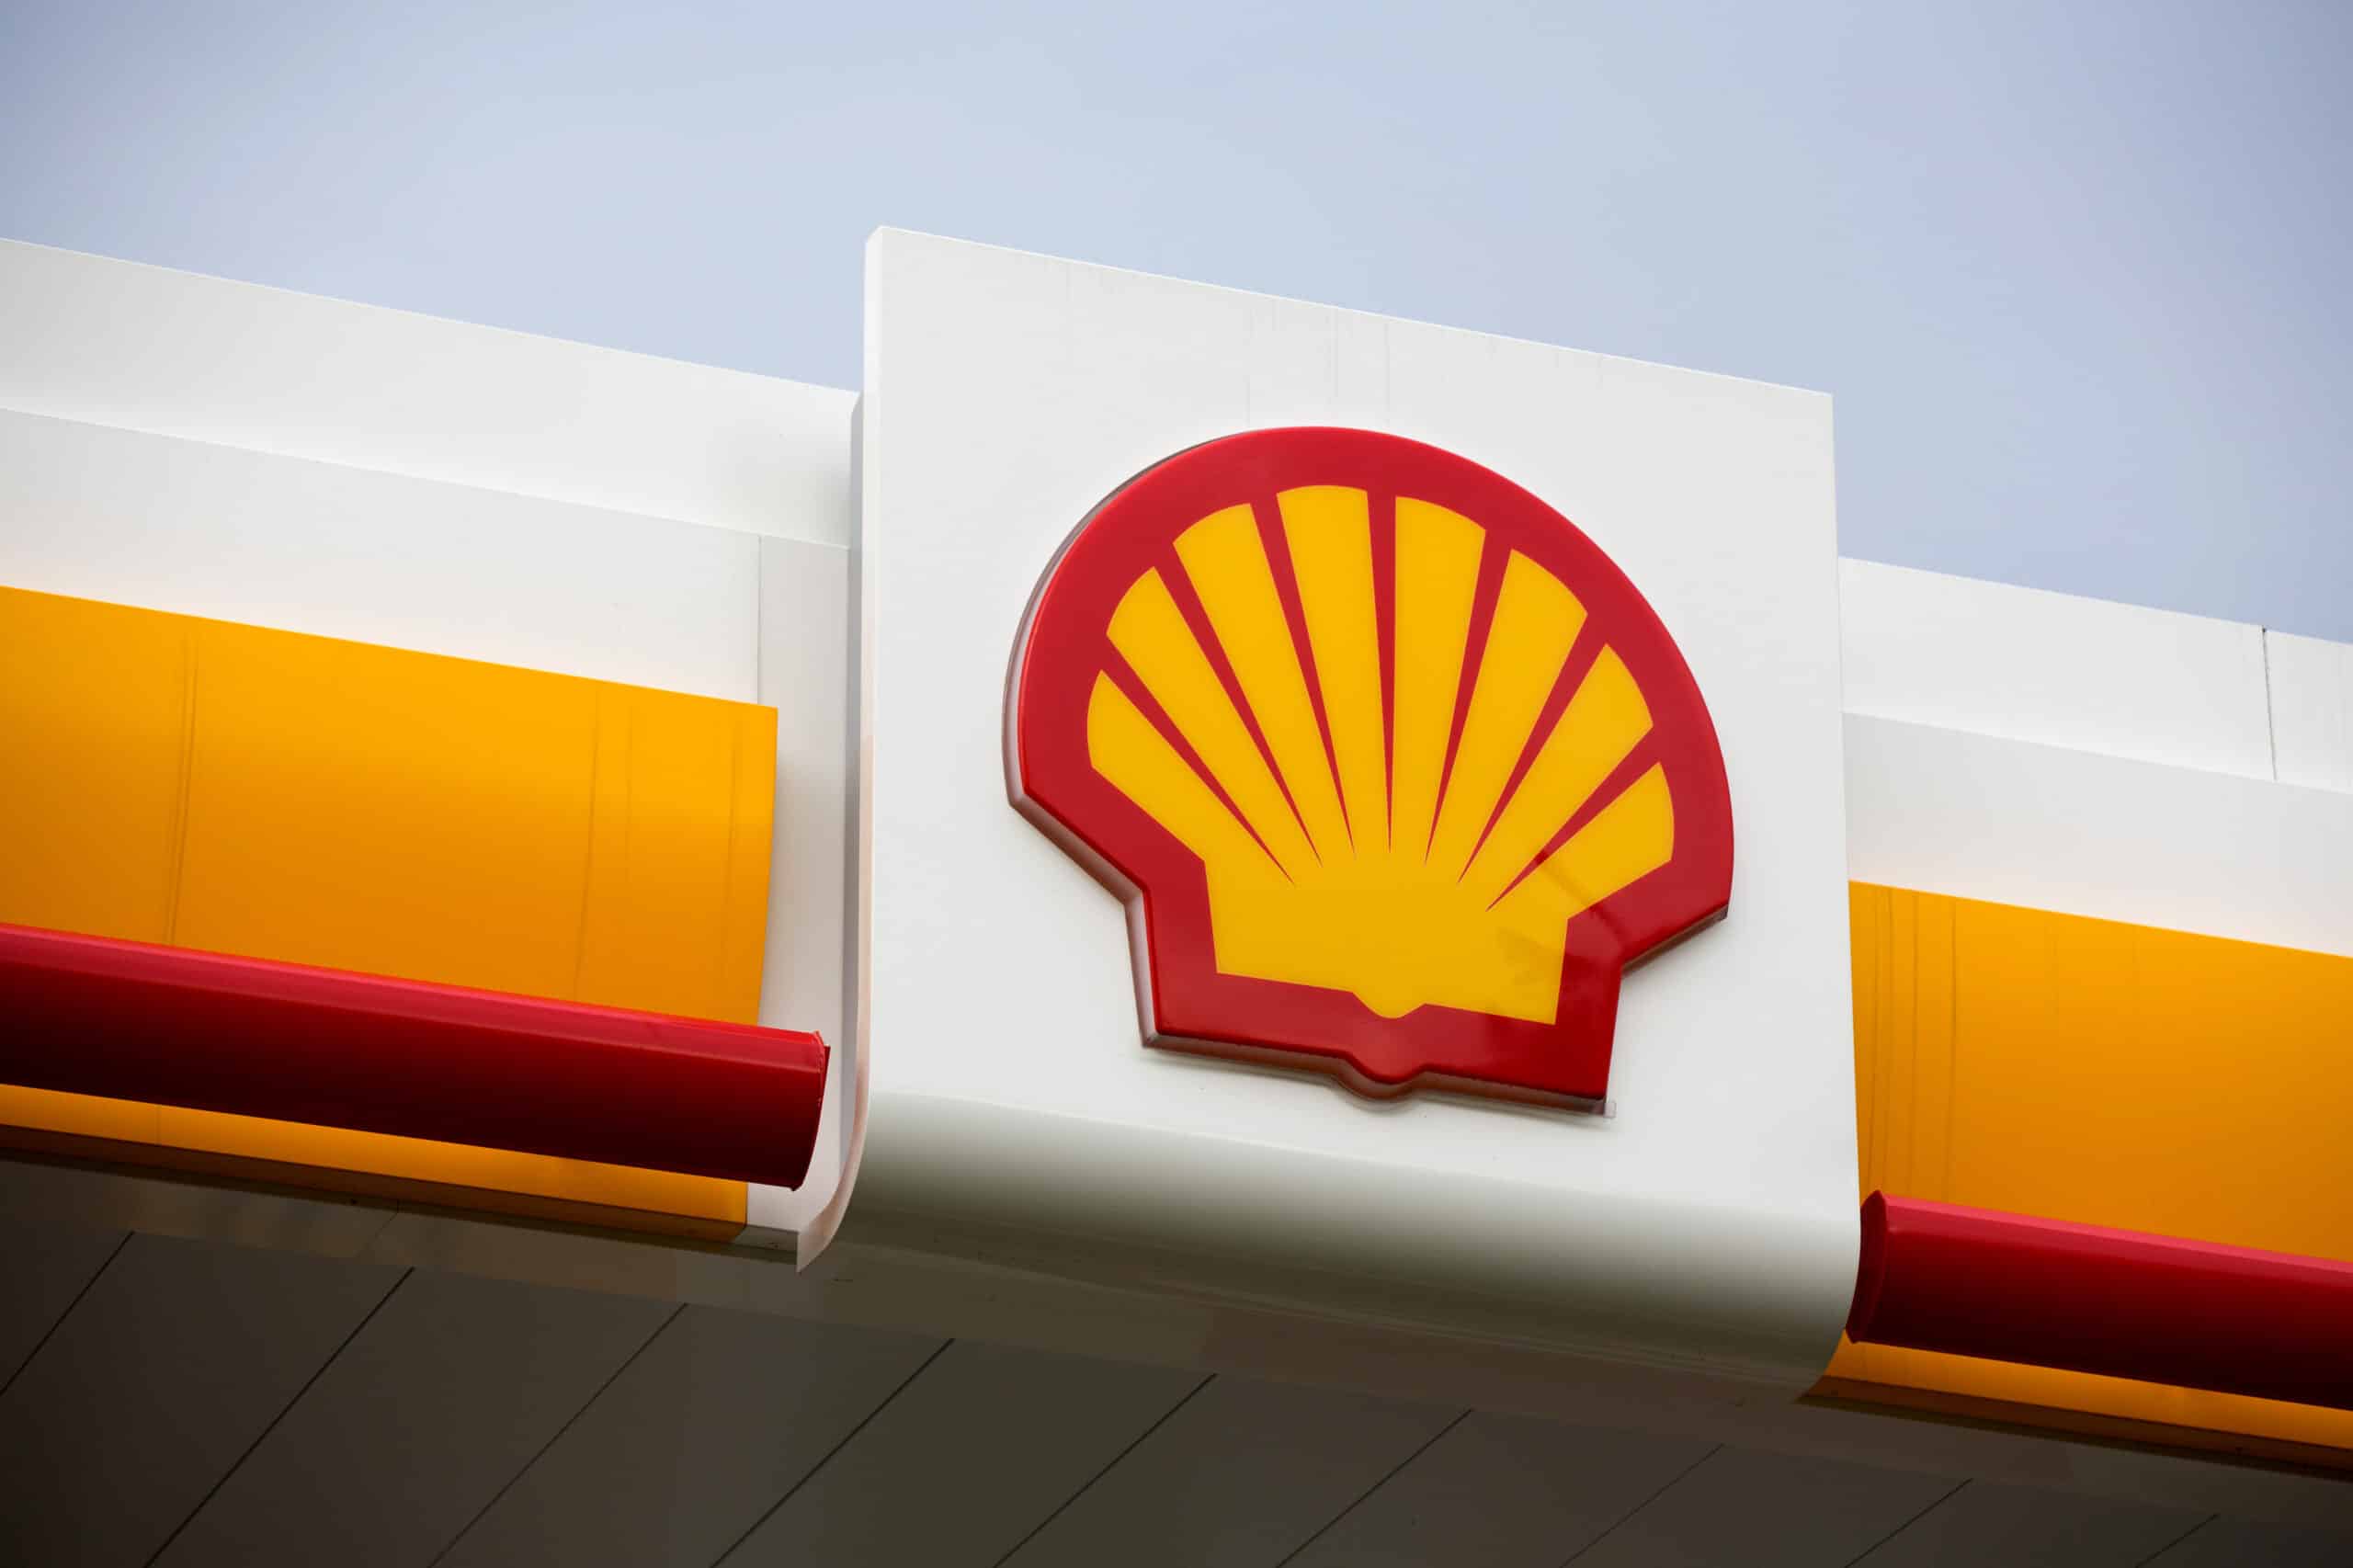 Shell shel Announces 15 Dividend Increase Amid Renewed Focus on Fossil Fuels